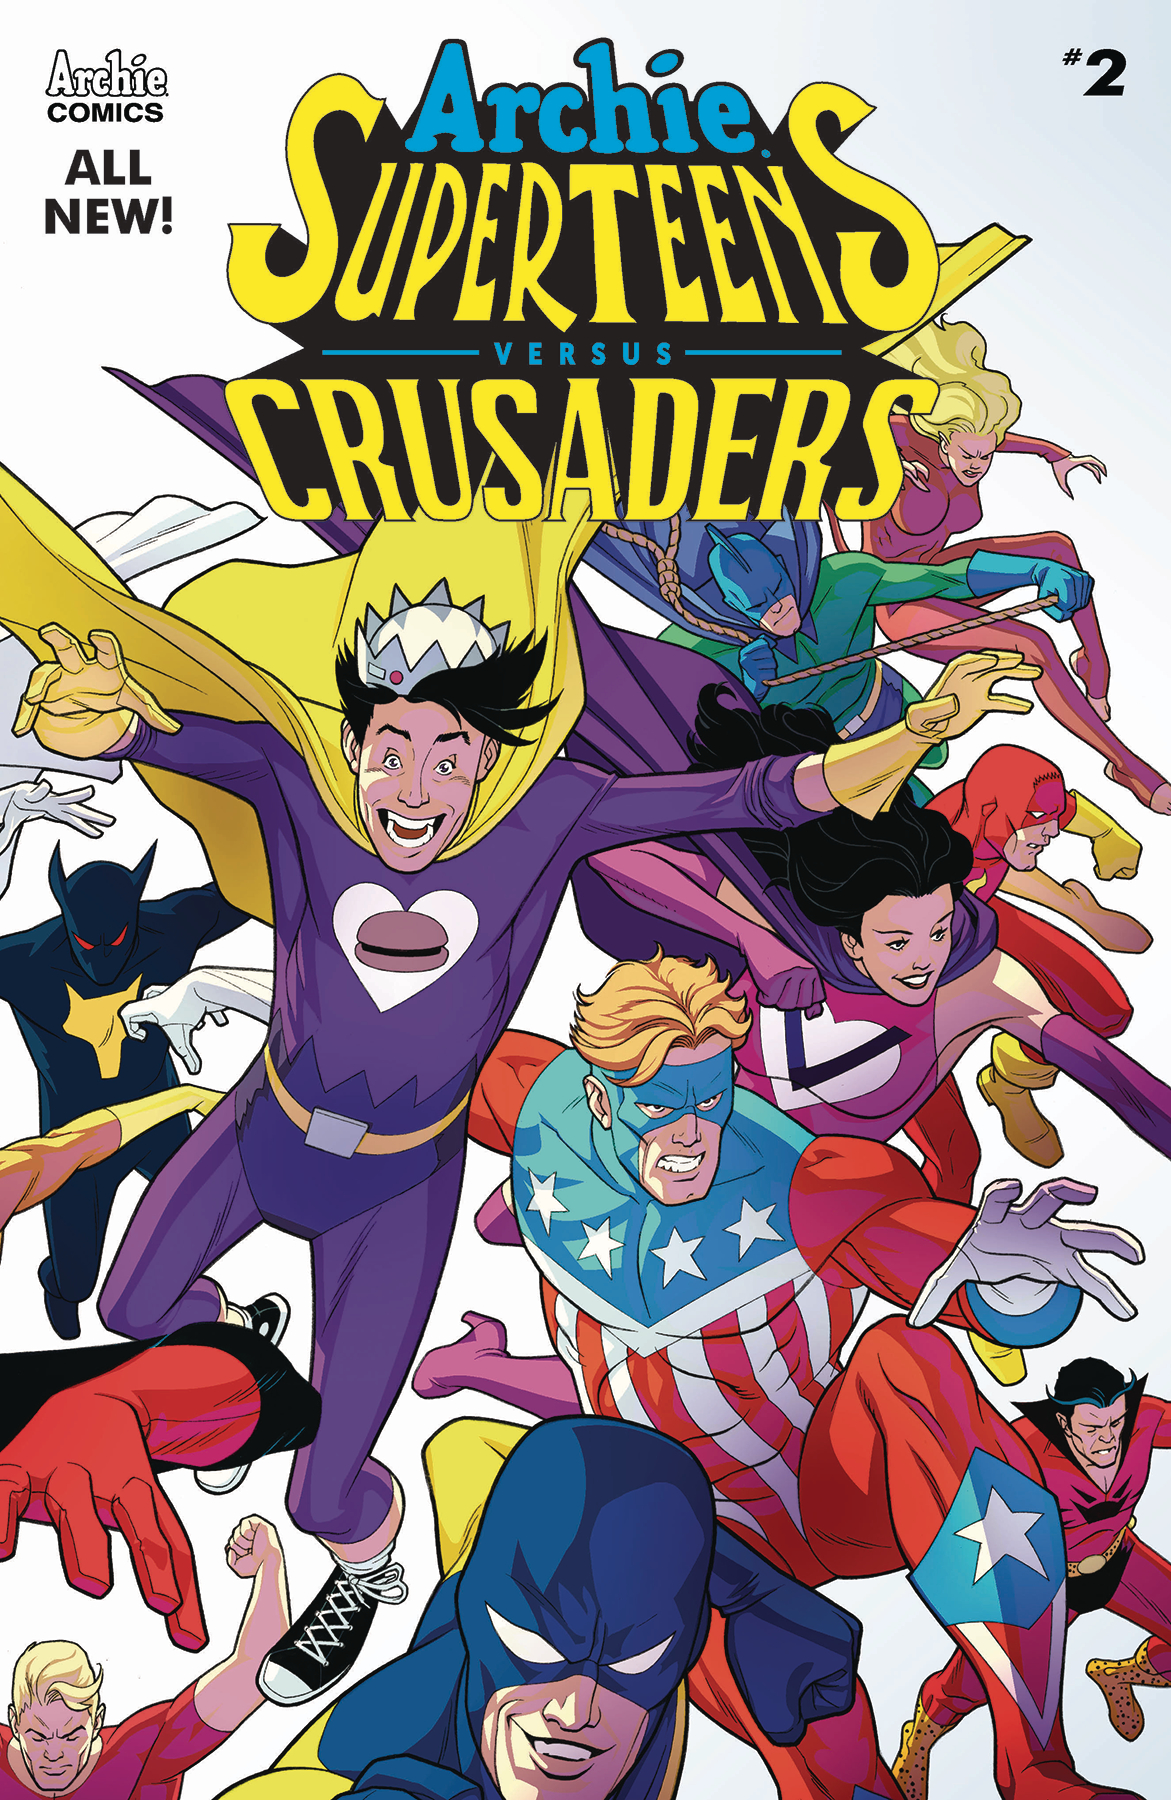 ARCHIES SUPERTEENS VS CRUSADERS #2 CVR A WILLIAMS CONNECTING